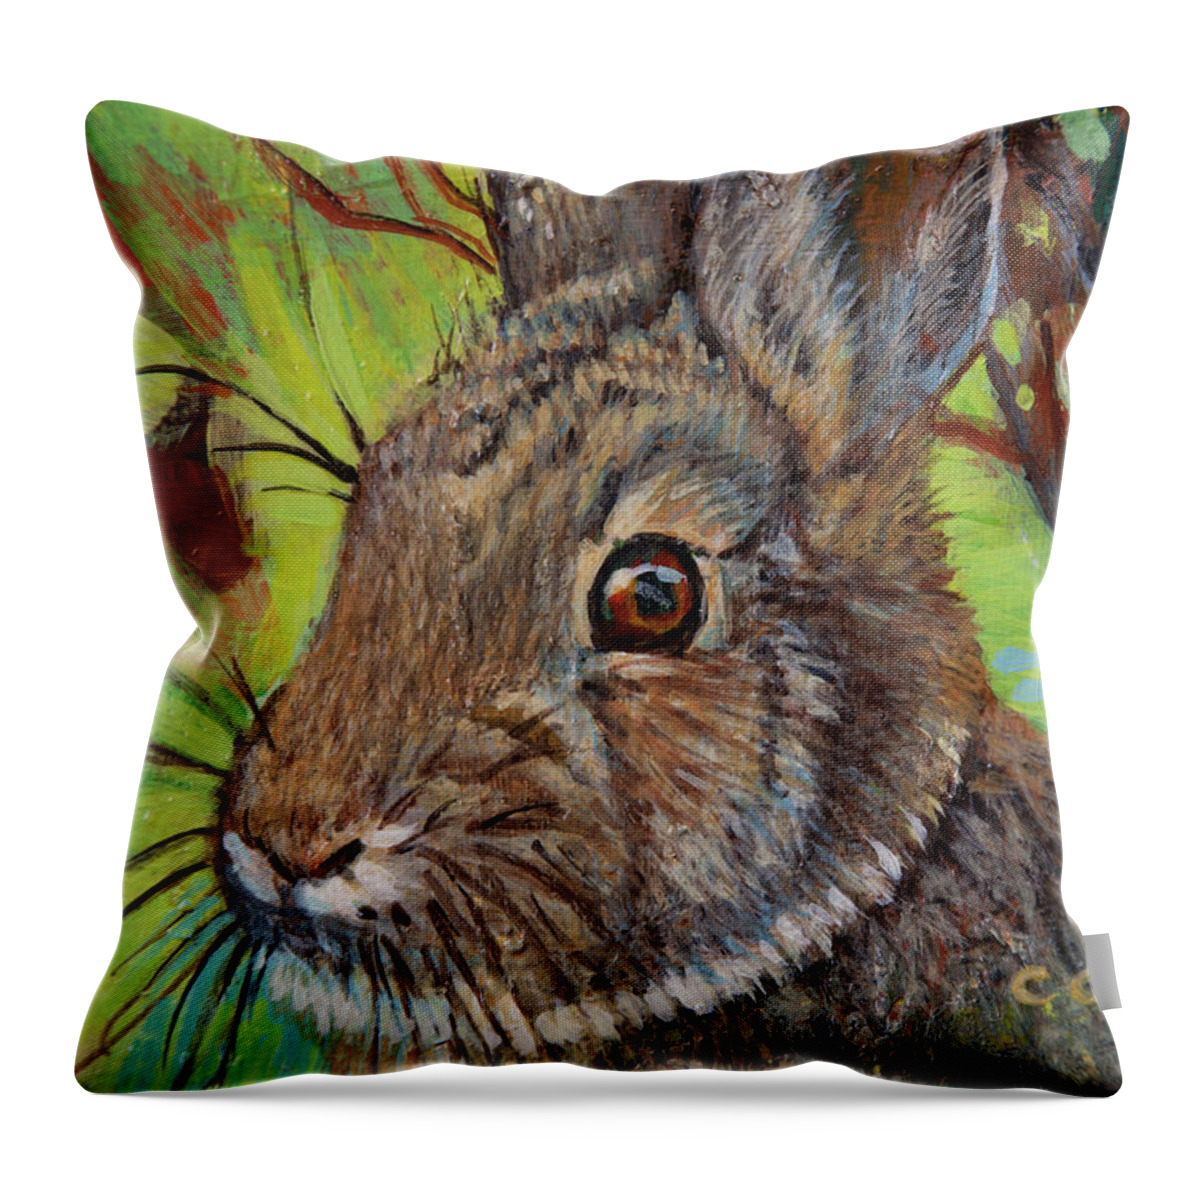 Rabbit Throw Pillow featuring the painting Cotton Tail Rabbit by Robert Corsetti